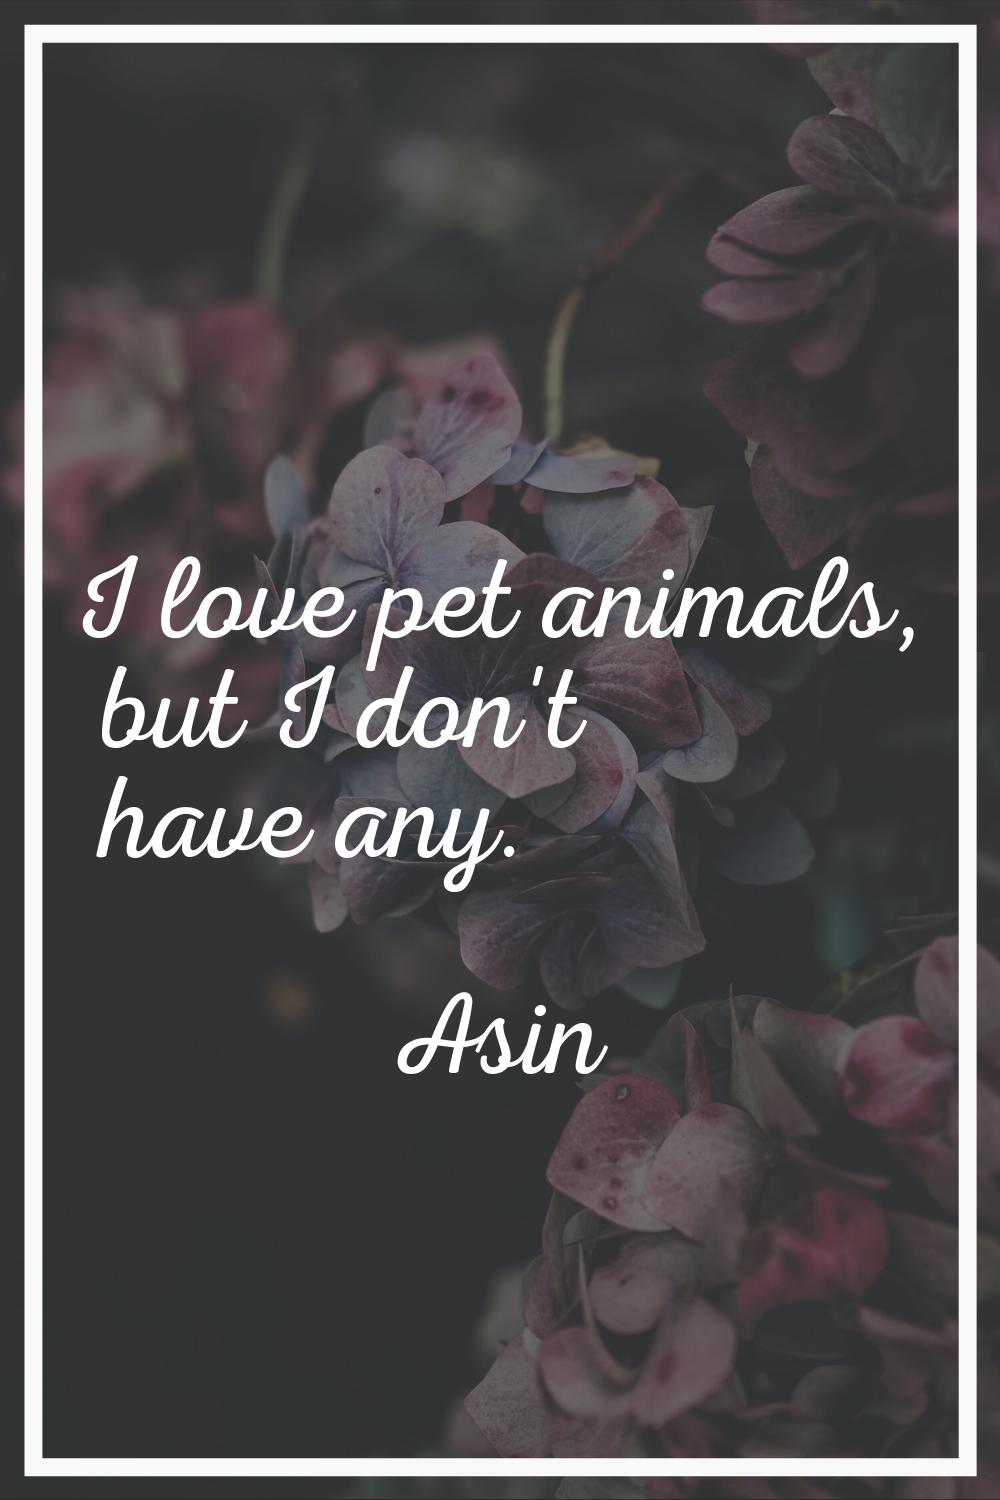 I love pet animals, but I don't have any.